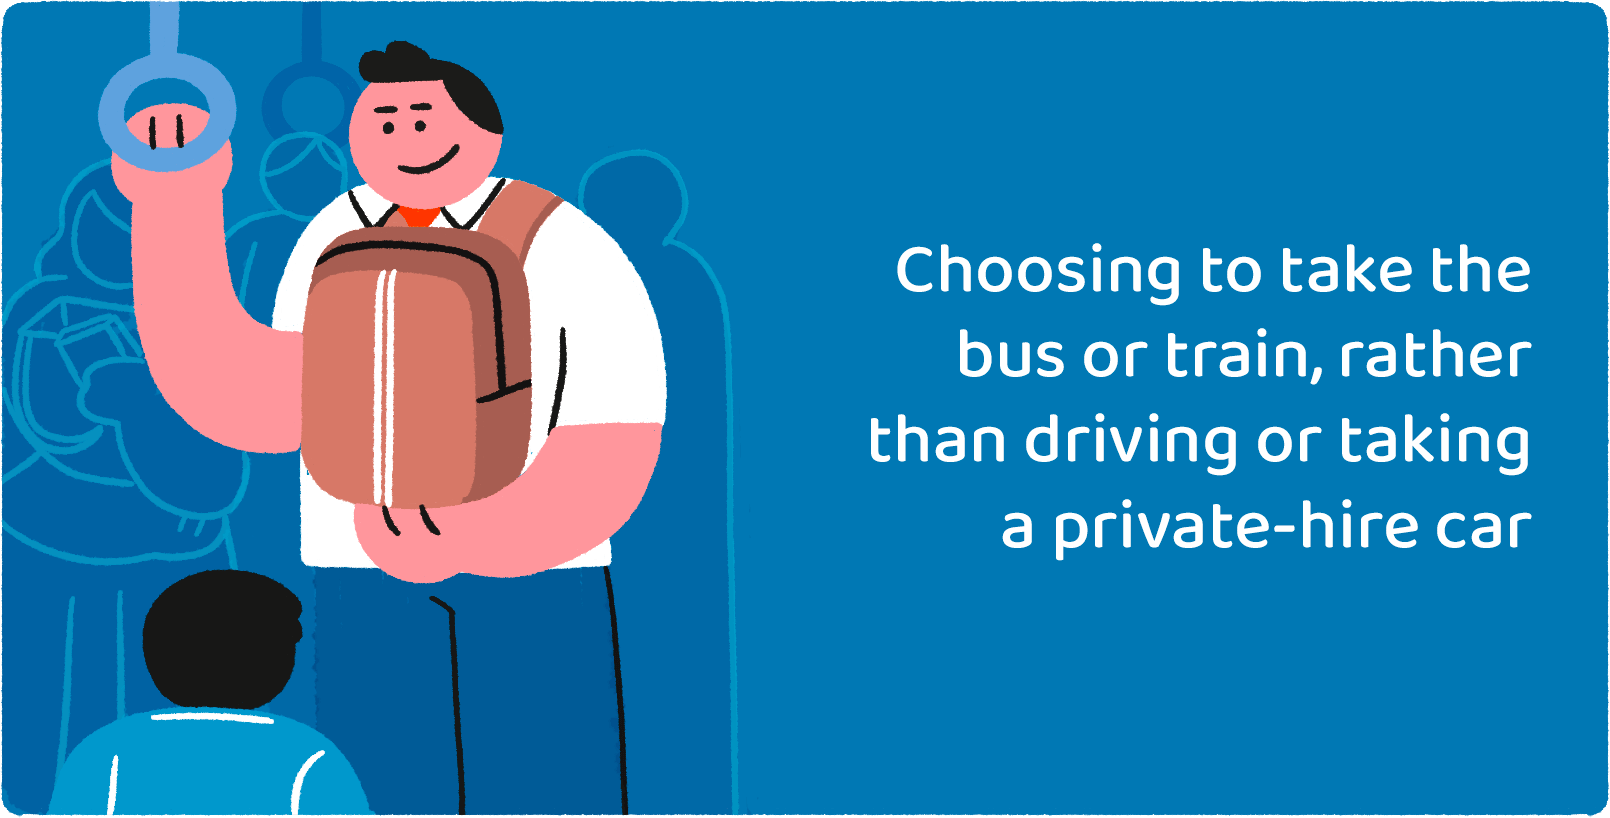 Choosing to take the bus or train, rather than driving or taking a private-hire car